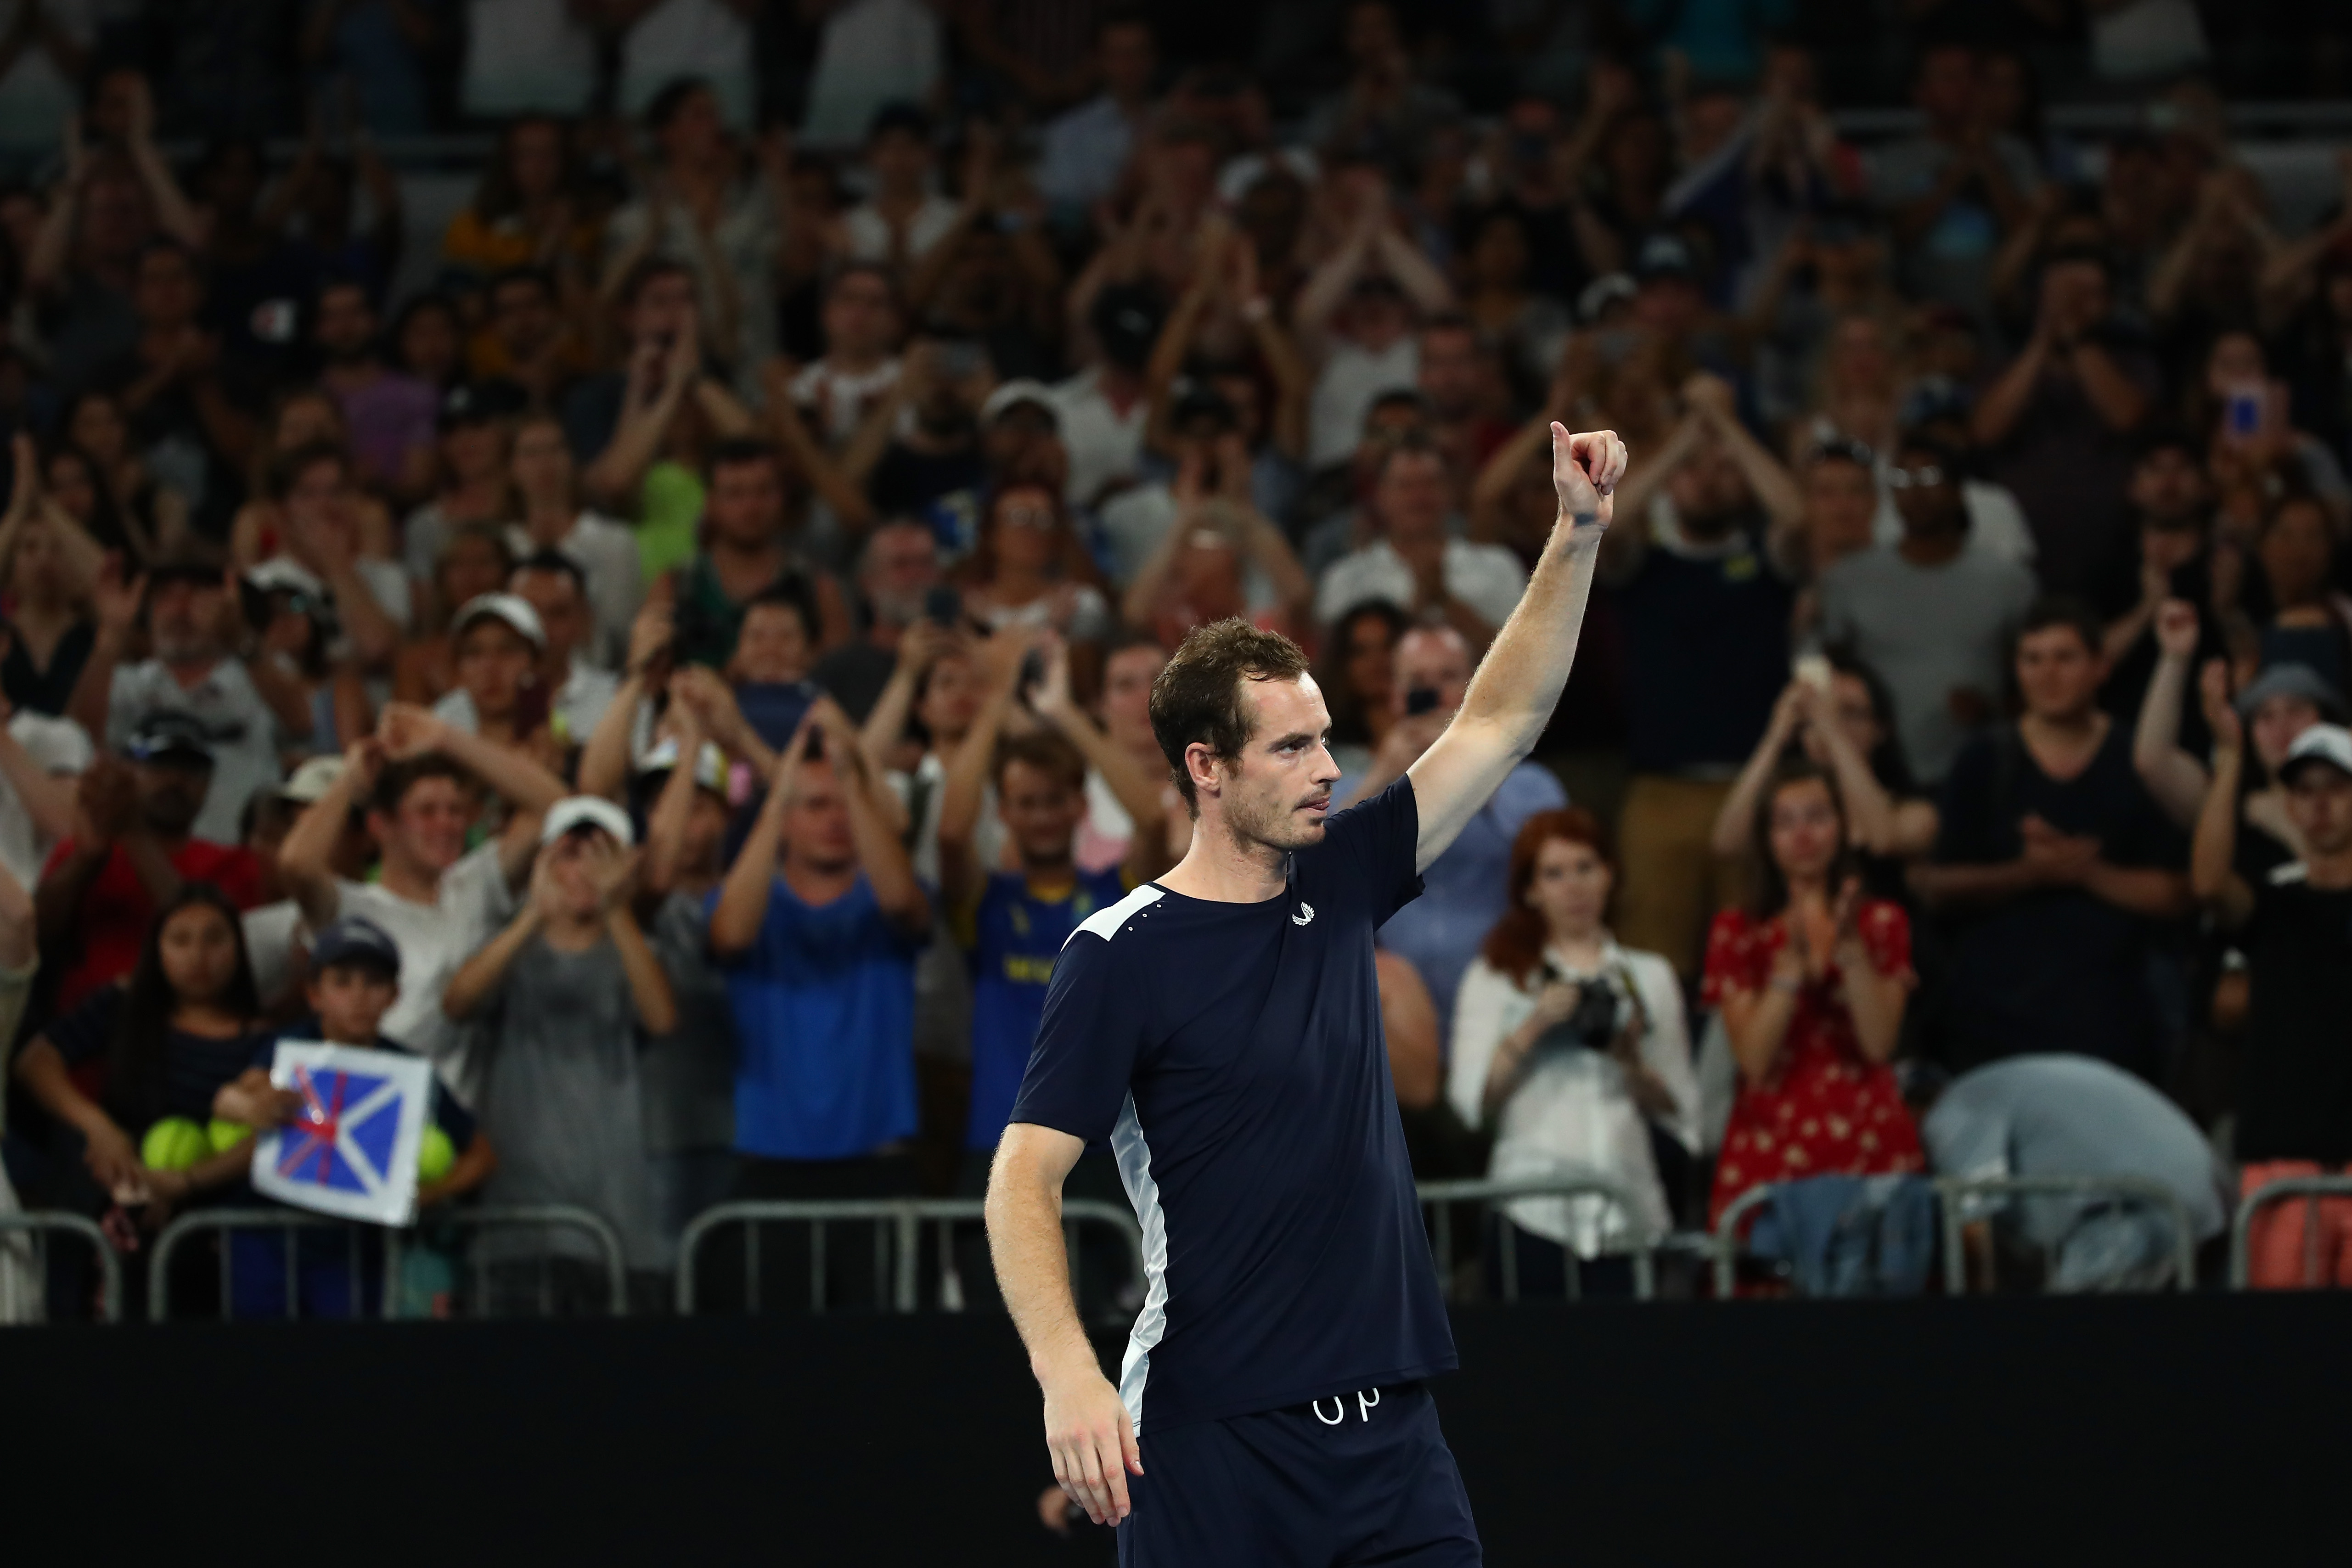 Andy Murray thanks the crowd after losing his first round match against Roberto Bautista Agut of Spain.